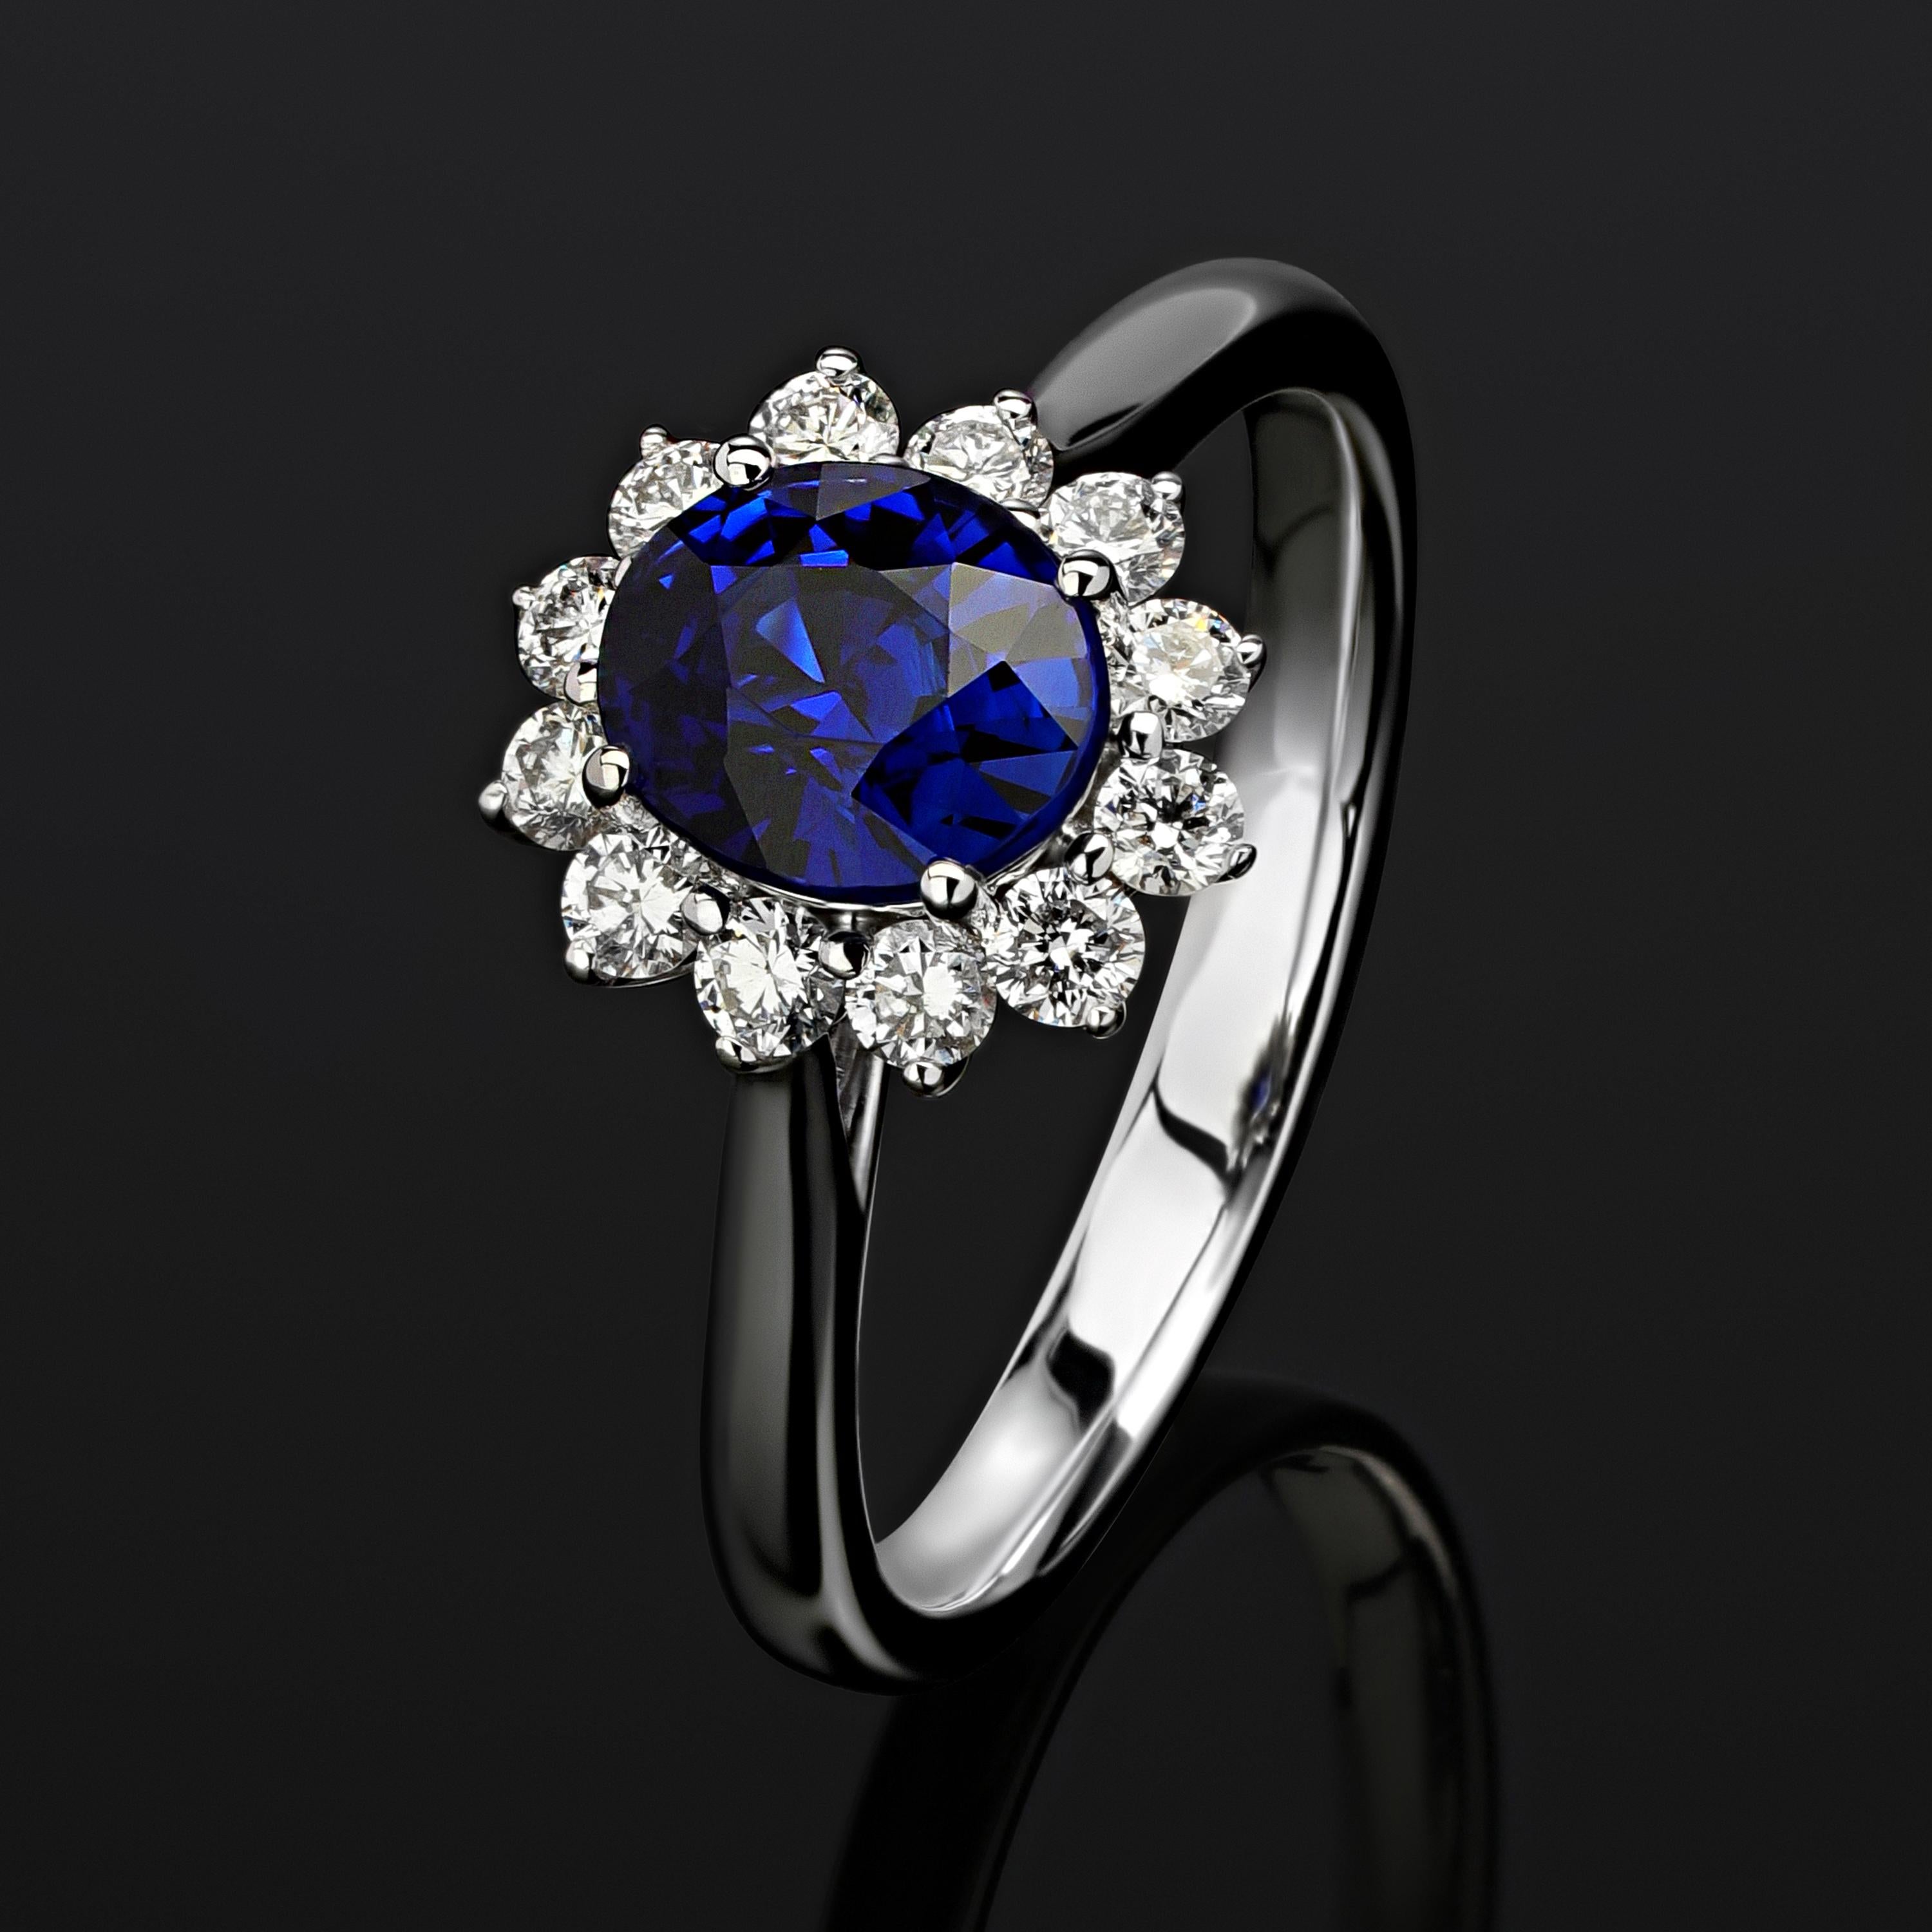 An amazing 18K gold ring with natural unheated Royal Blue sapphire and diamond in Princess Diana style

sapphire origin - Madagascar

sapphire measurements - 0.16 х 0.24 х 0.28 in / 4 х 6 х 7 mm

sapphire weight - 1.38 carats

ring size - 6 US, 52